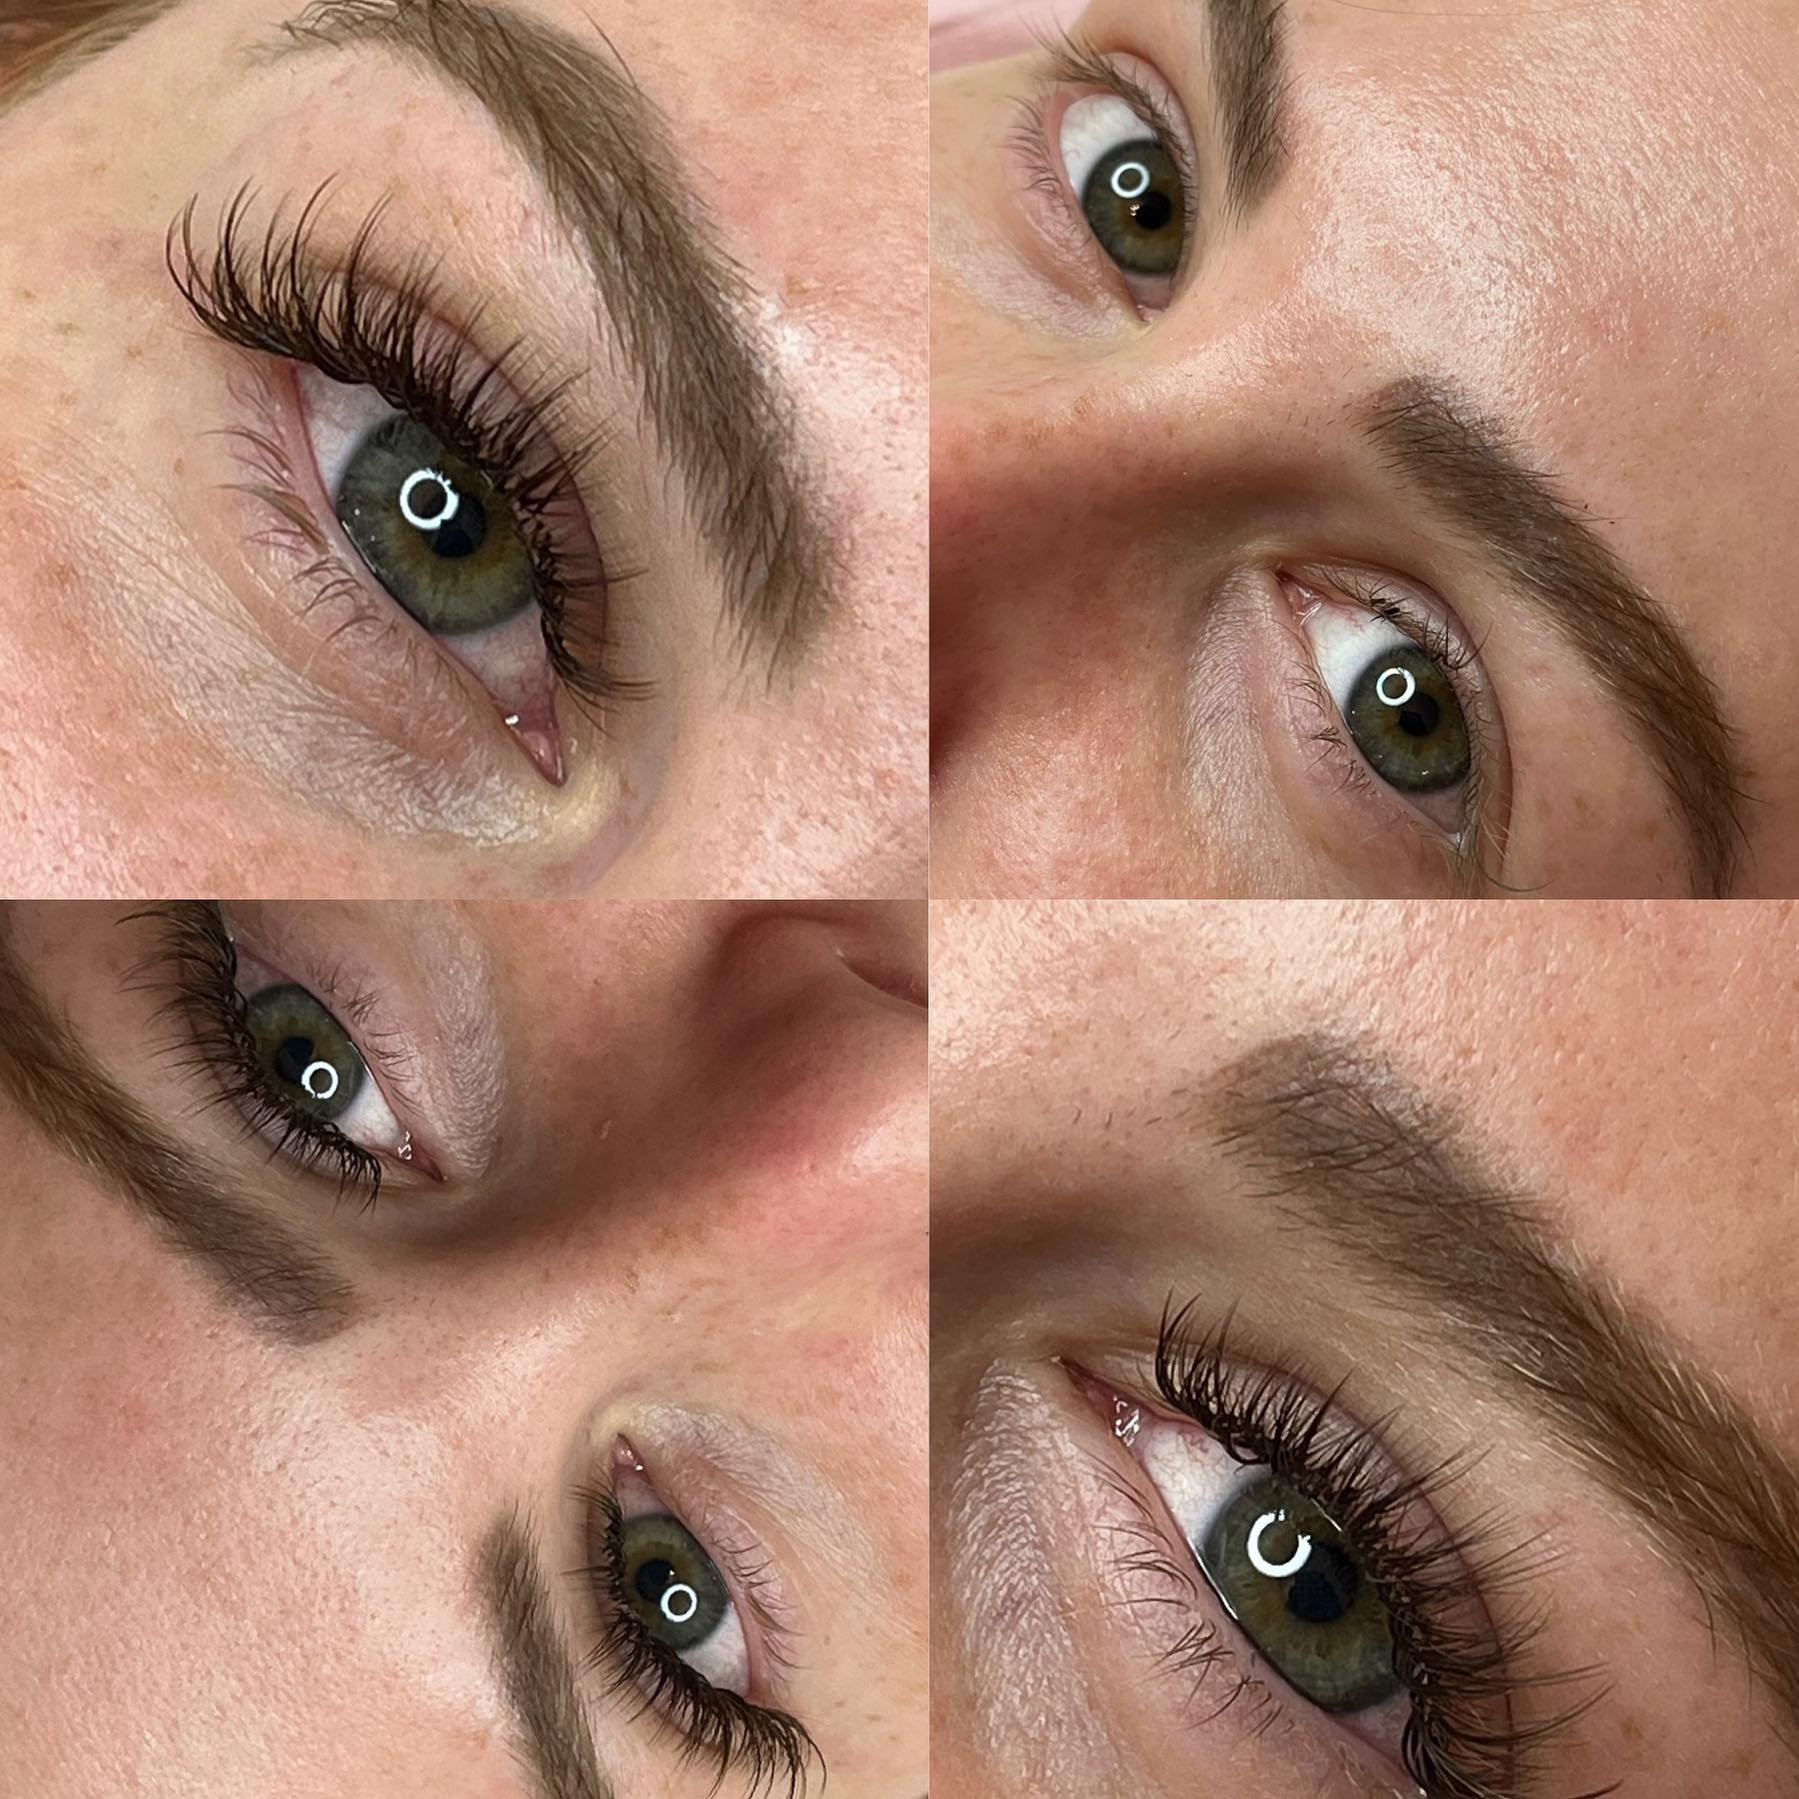 &ldquo;Lashes are always too heavy!&rdquo; Think again! Our lash team kills the game 😍😍 beautiful wispy hybrids for the win! I think this is my next set! 

#yycbrows #yycsmall #yyclocal #lashes #pmu #q&amp;a #questions #yyclocal #lashinout #lashpro